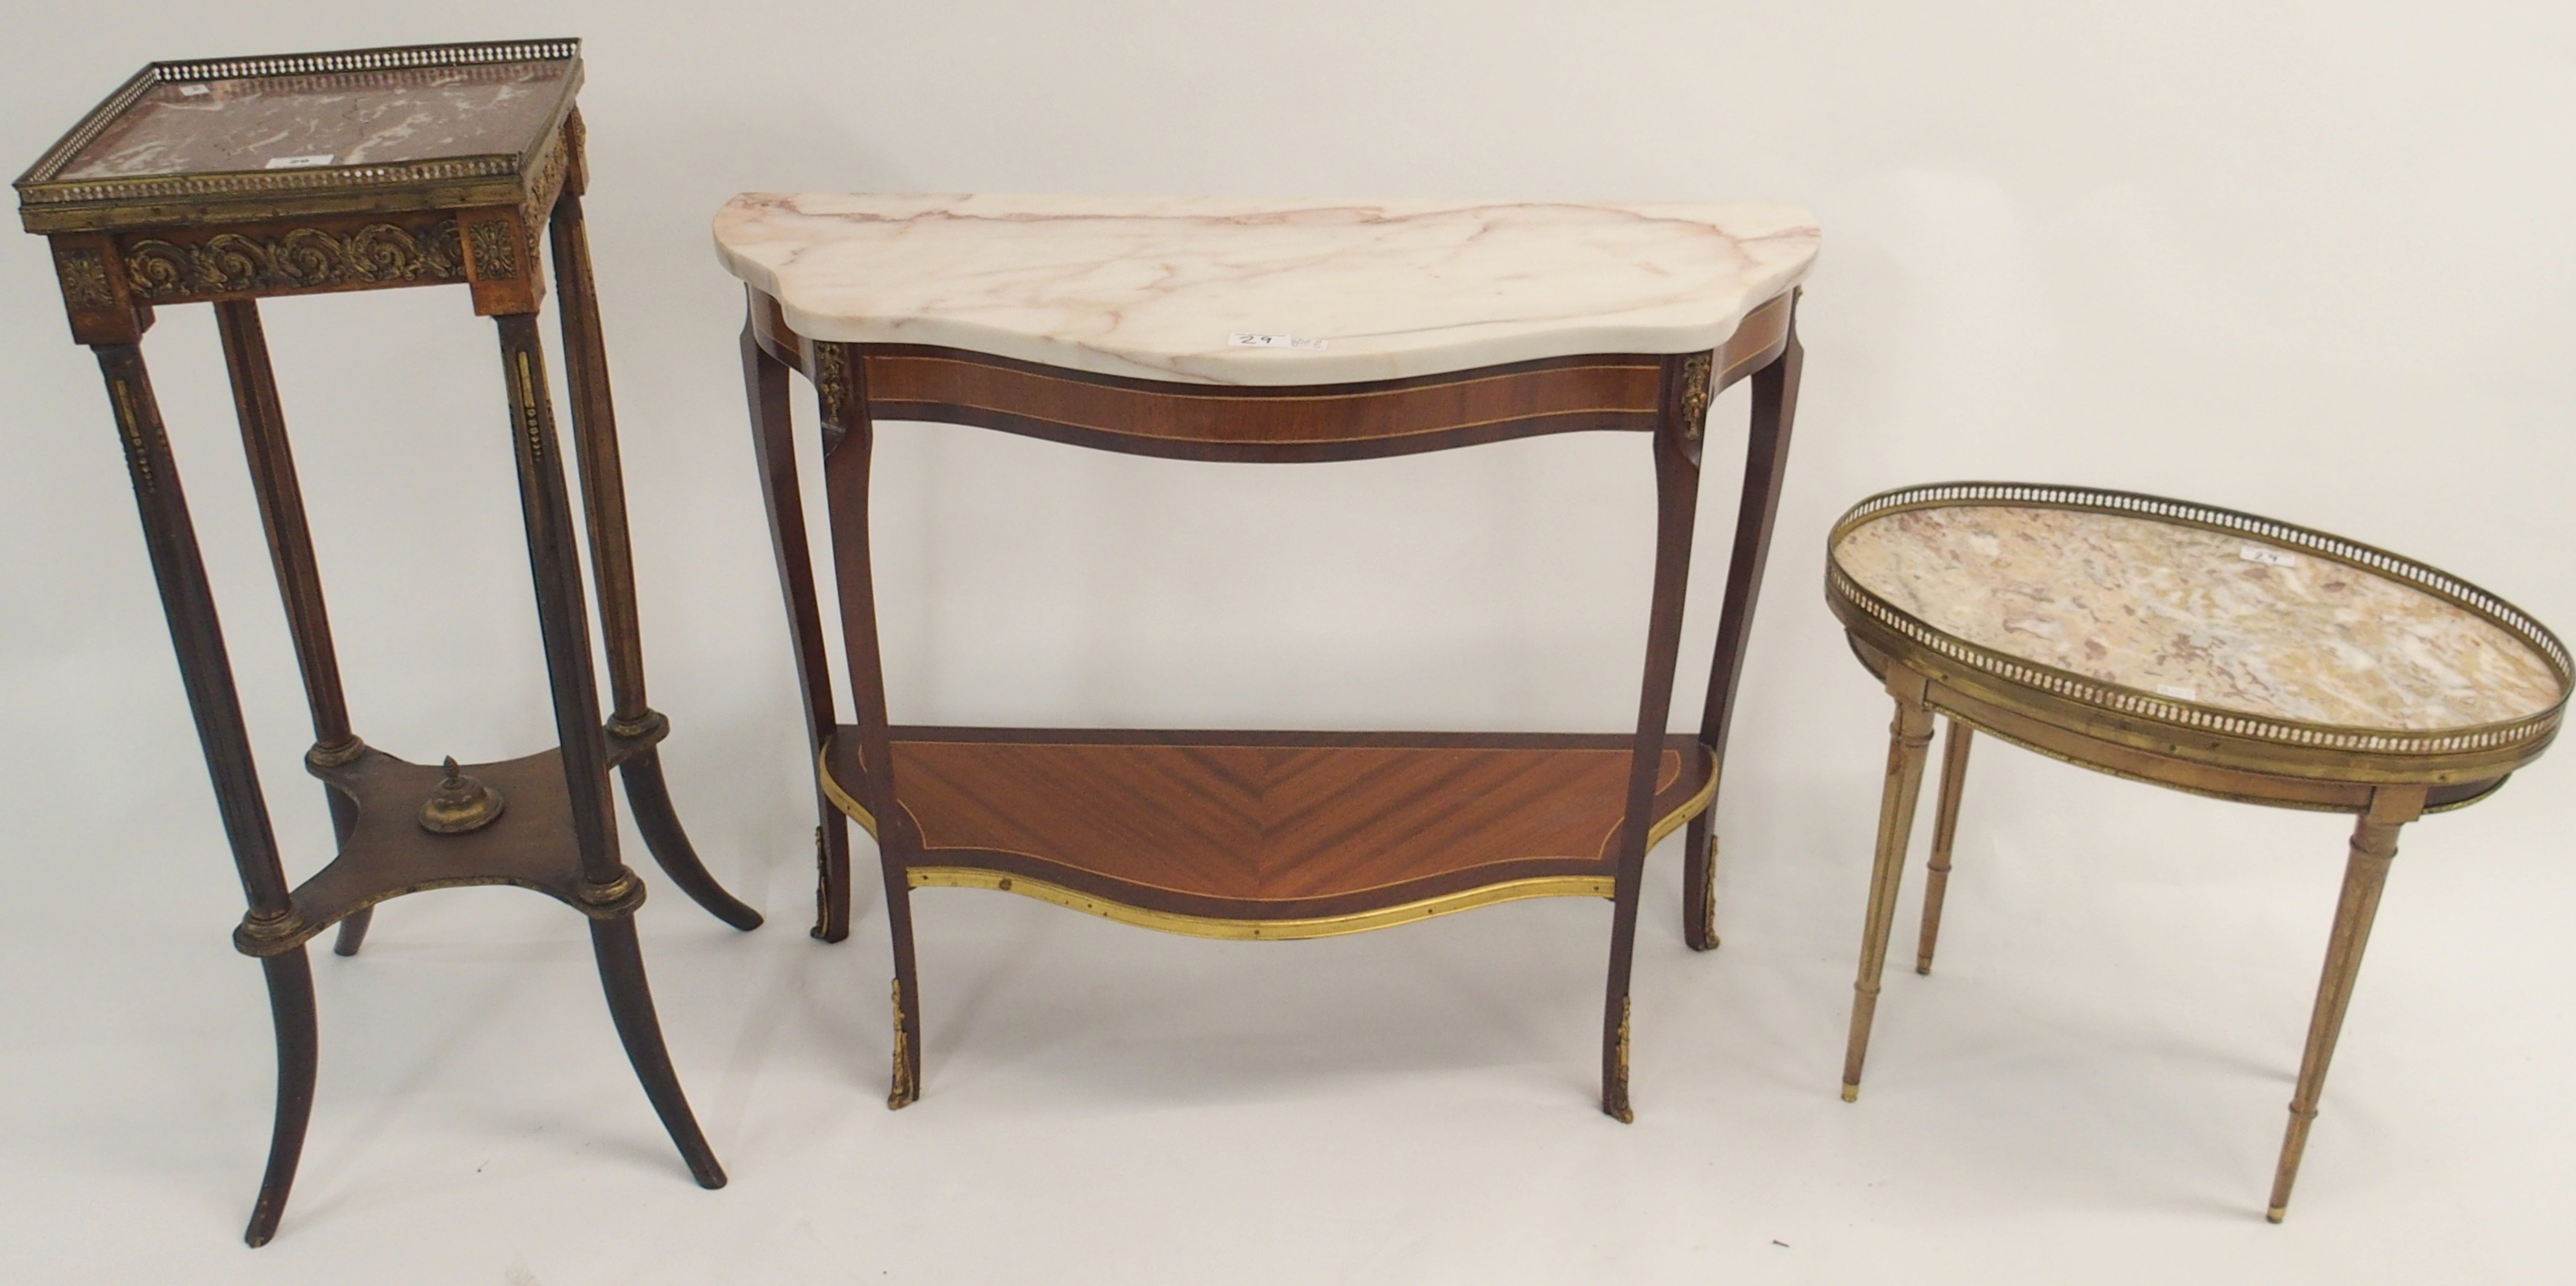 A marble topped pedestal table, 80cm high x 35cm wide x 35cm deep, small oval marble topped